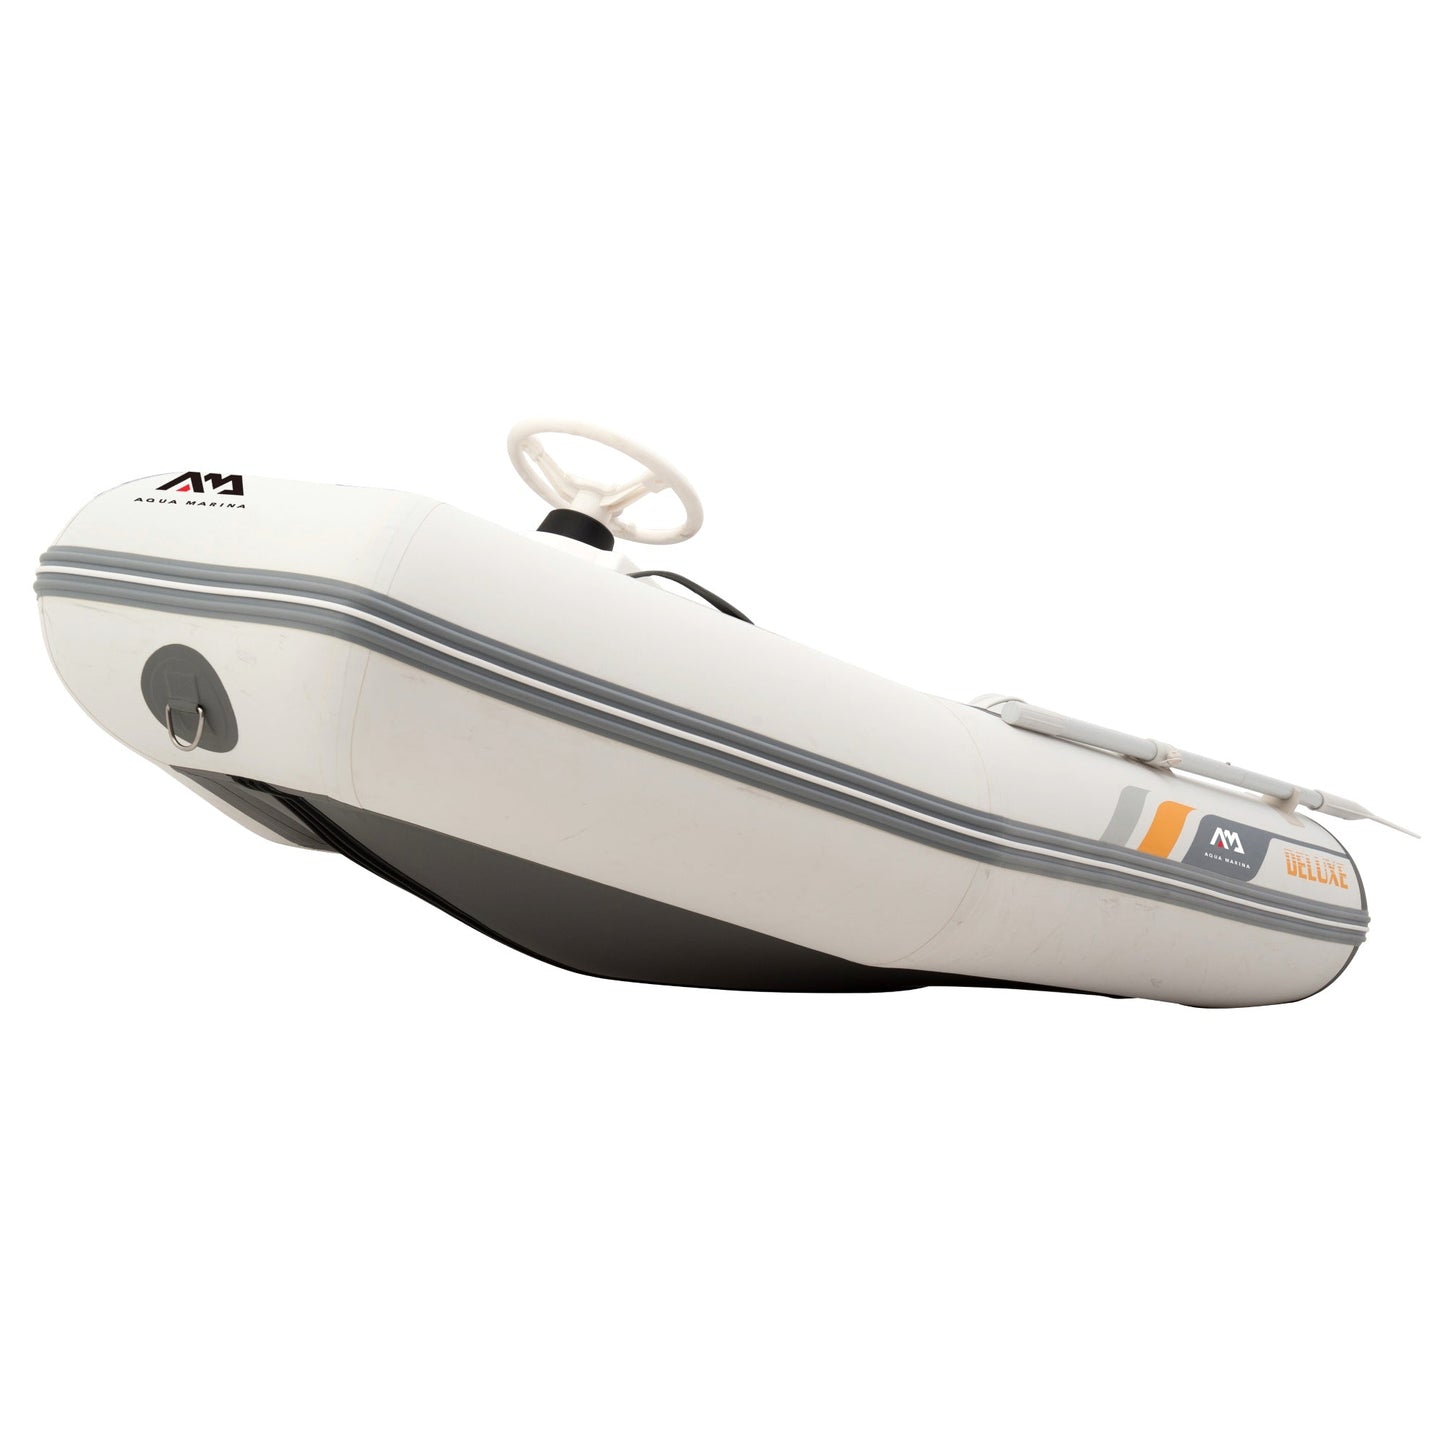 A-Deluxe 3.3m Inflatable Speed Boat (Aluminum Deck)